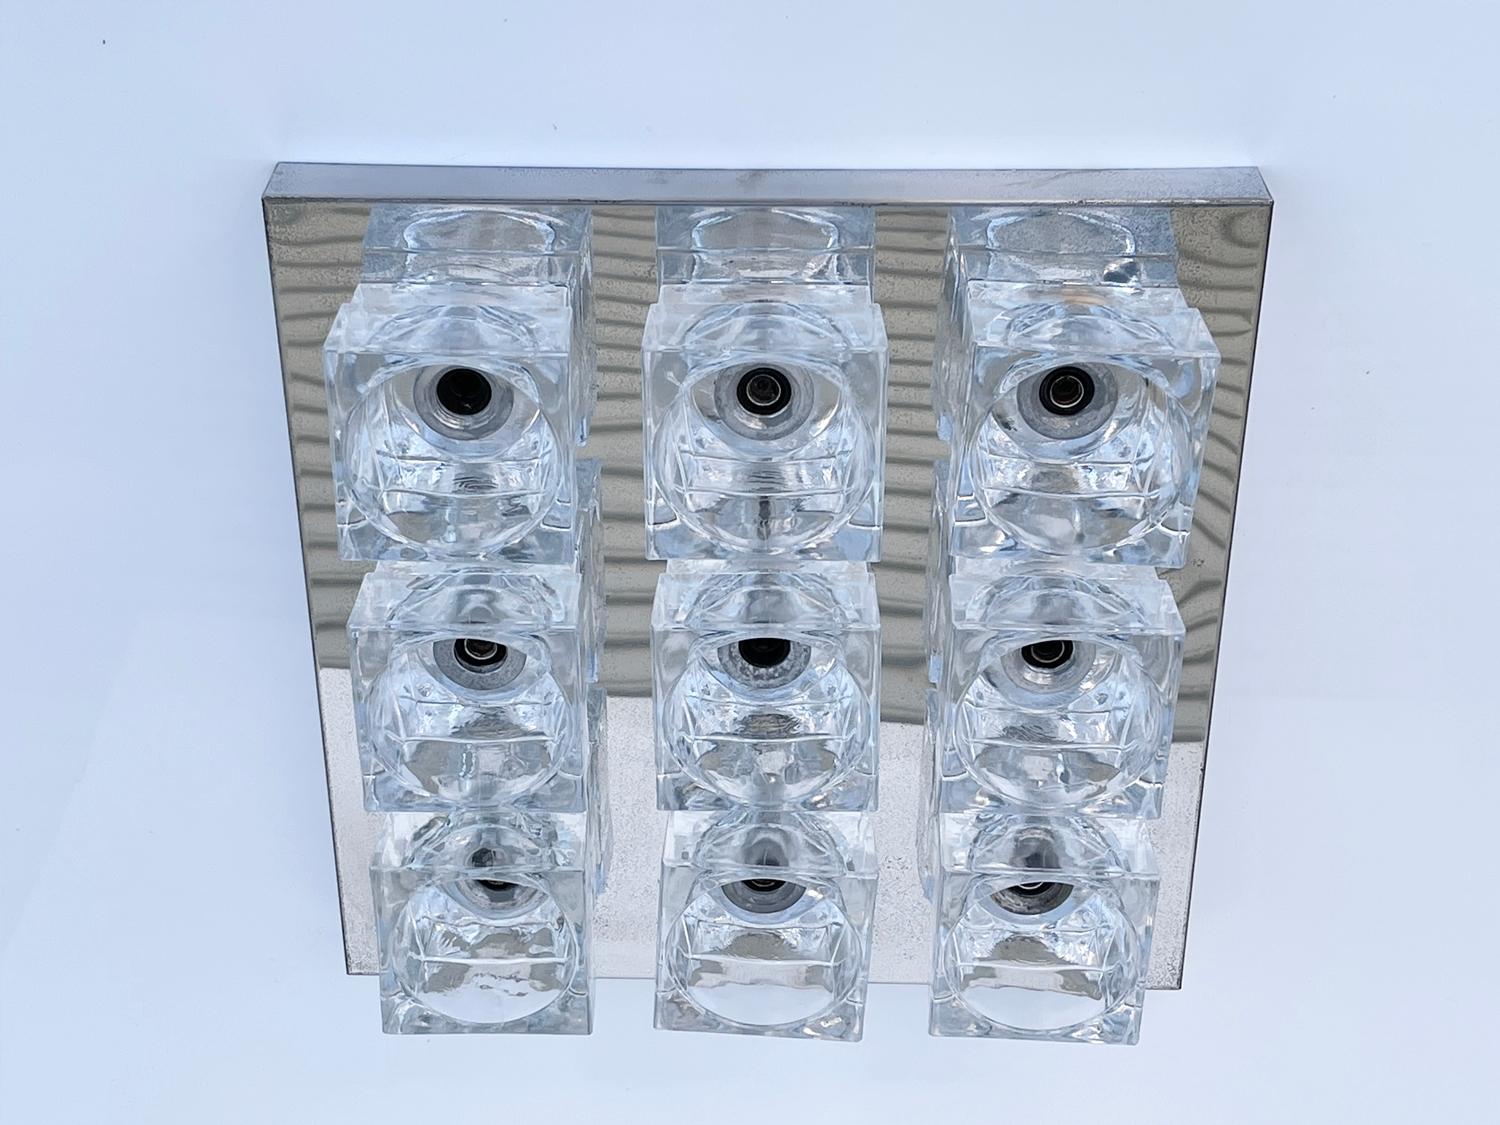 Noted Italian lighting designer Gaetano Sciolari designed the futuristic Cubic series in the 1970s. Distributed in the USA by Lightolier.
These designs have stood the test of time. This example features nine large scale heavy glass cubes fixed to a